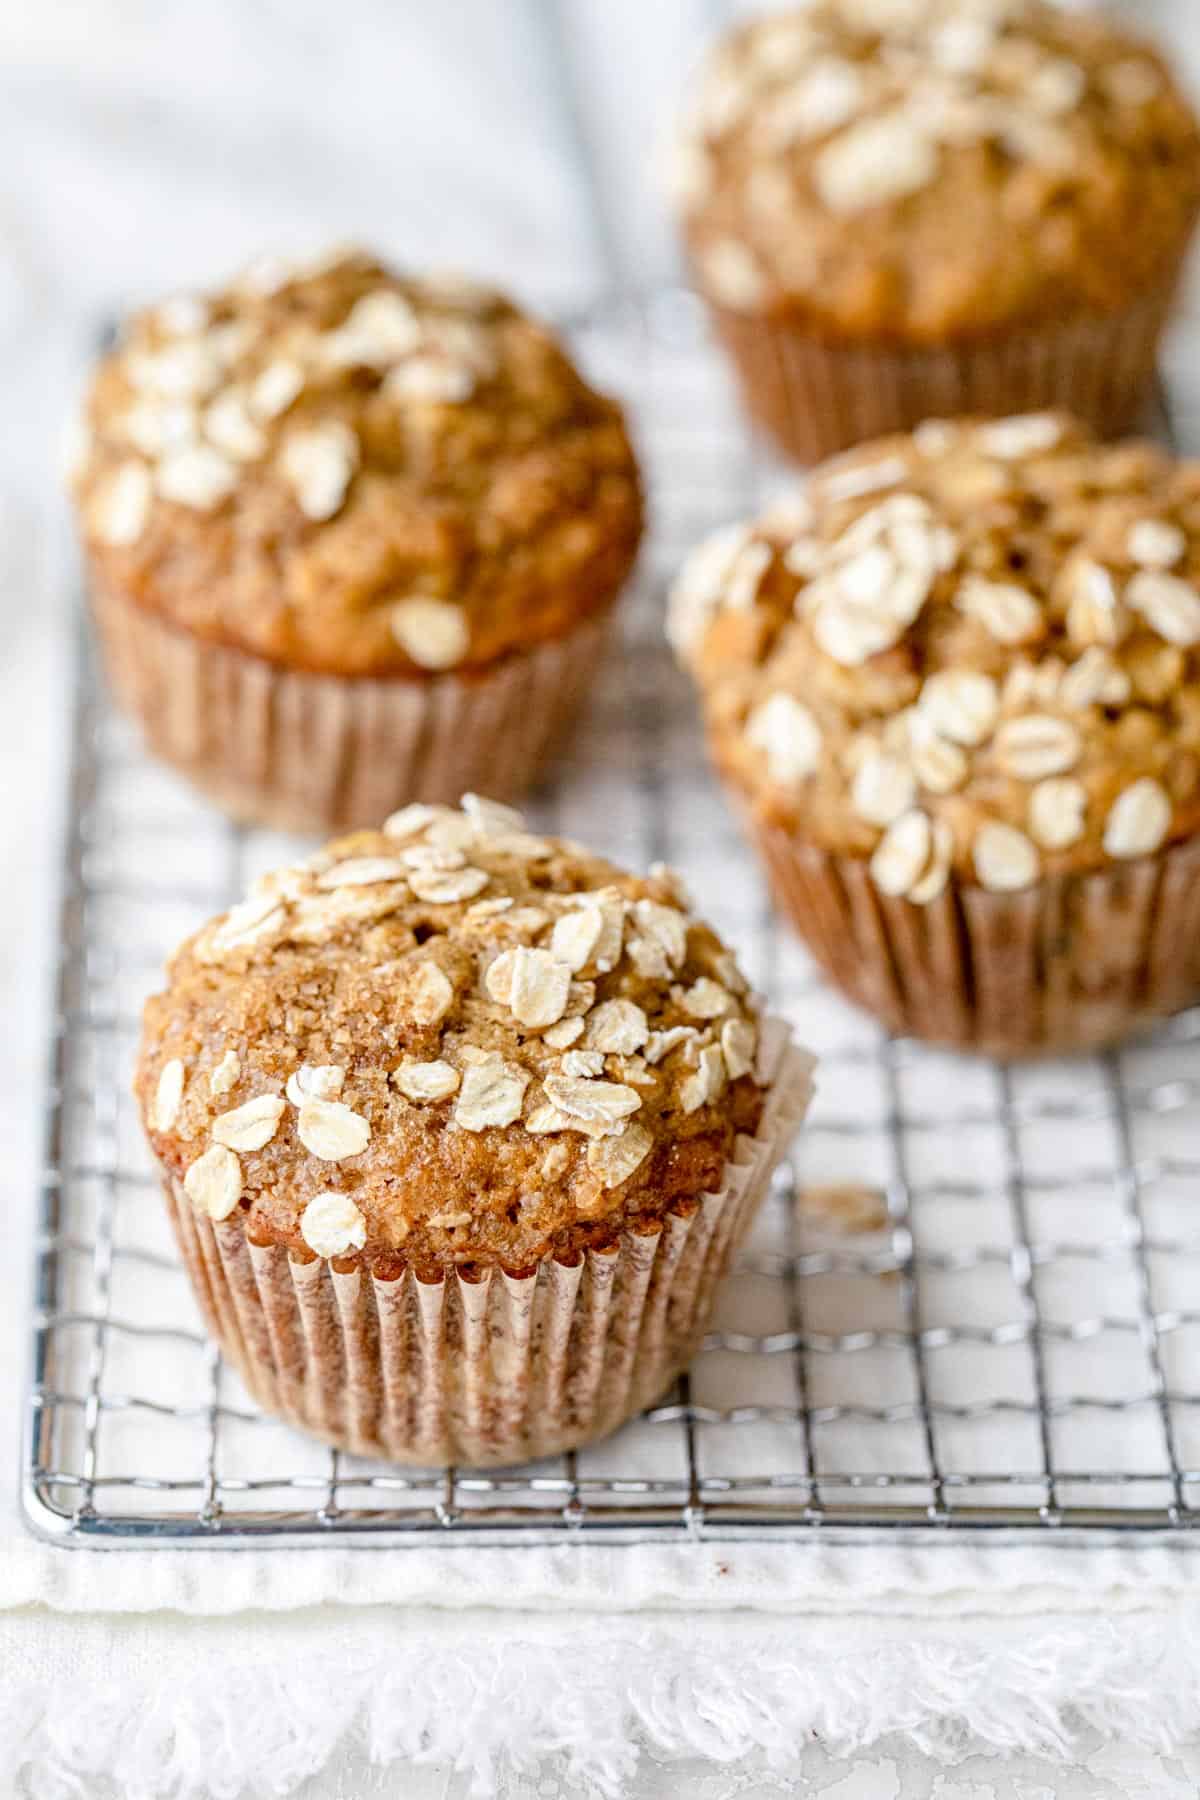 Healthy Banana Nut Muffins made with oats